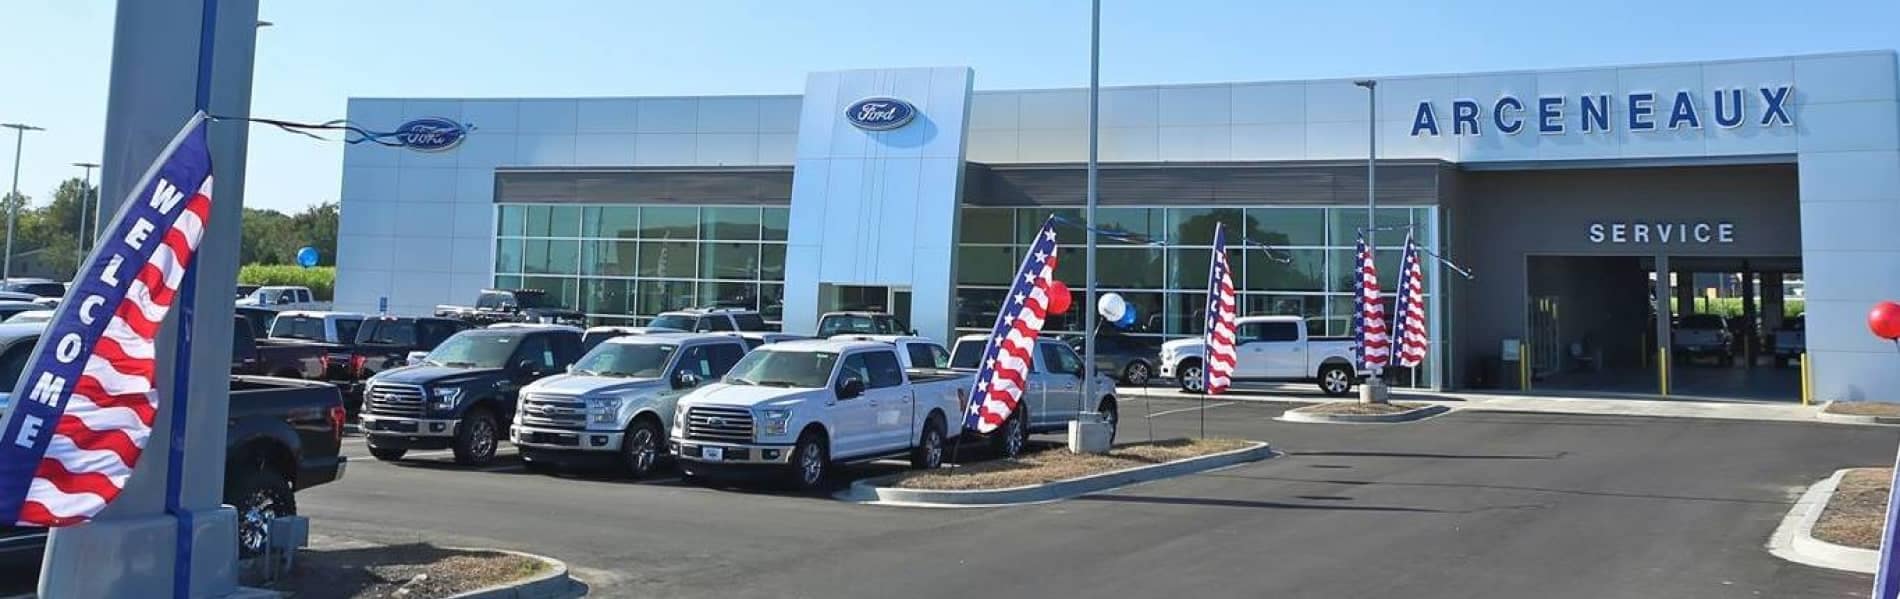 Arceneaux Ford outside of the dealership with Ford F-150 trucks on the lot